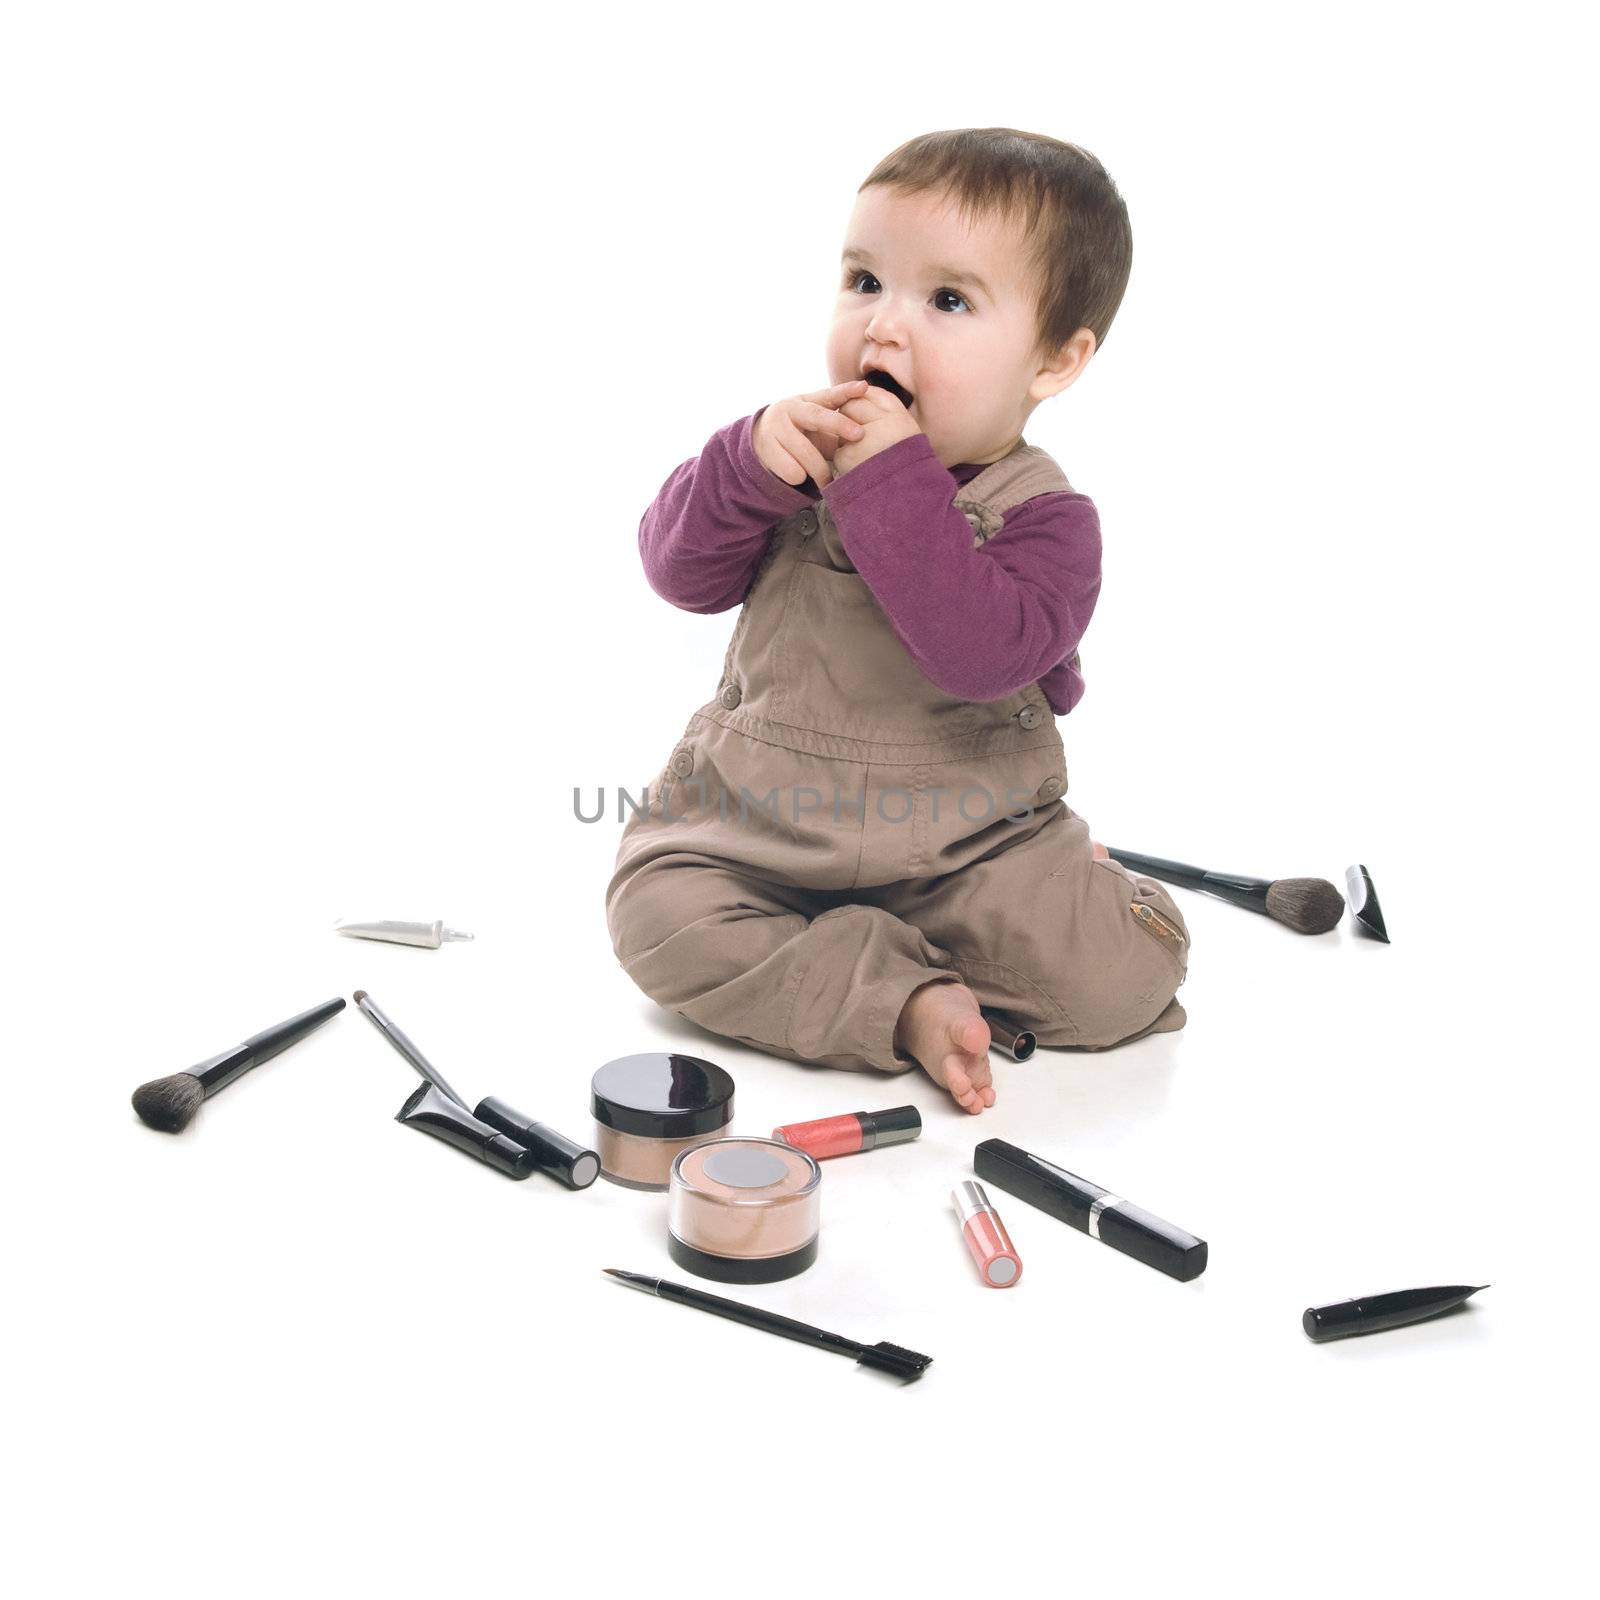 Baby girl playing with cosmetics, white background